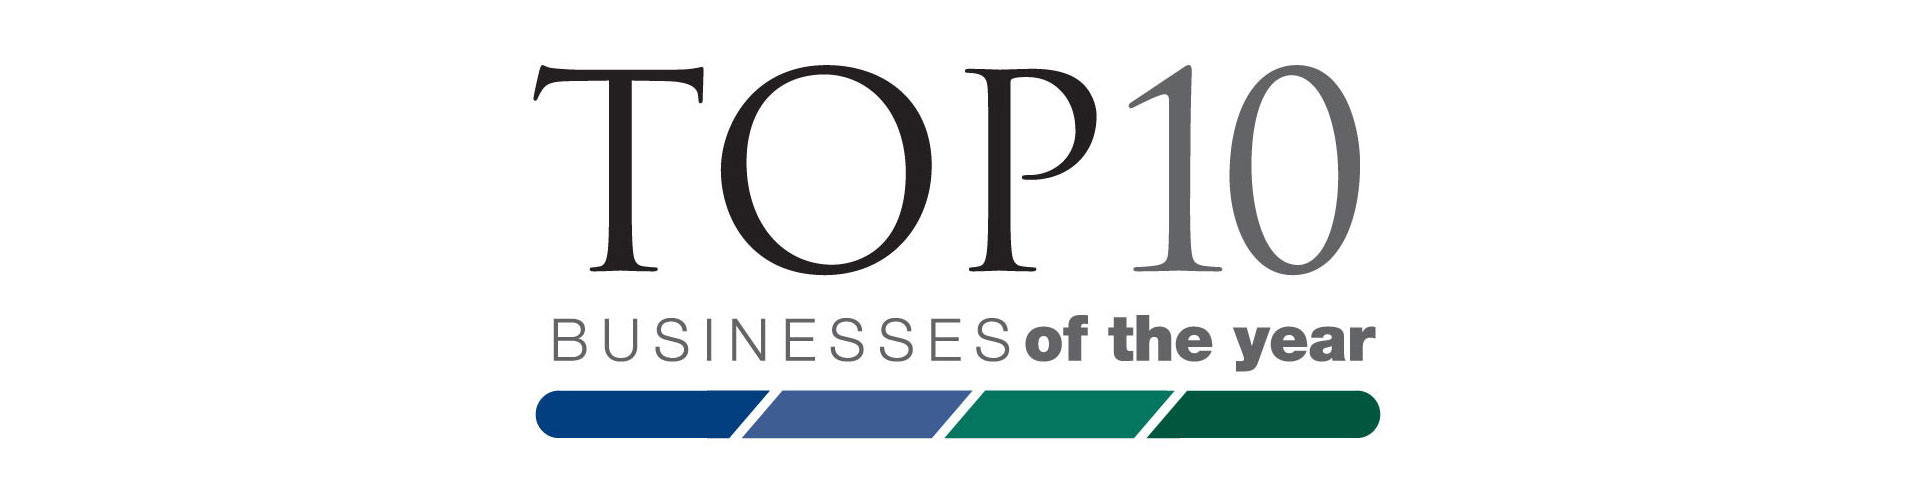 Top 10 Business of the year